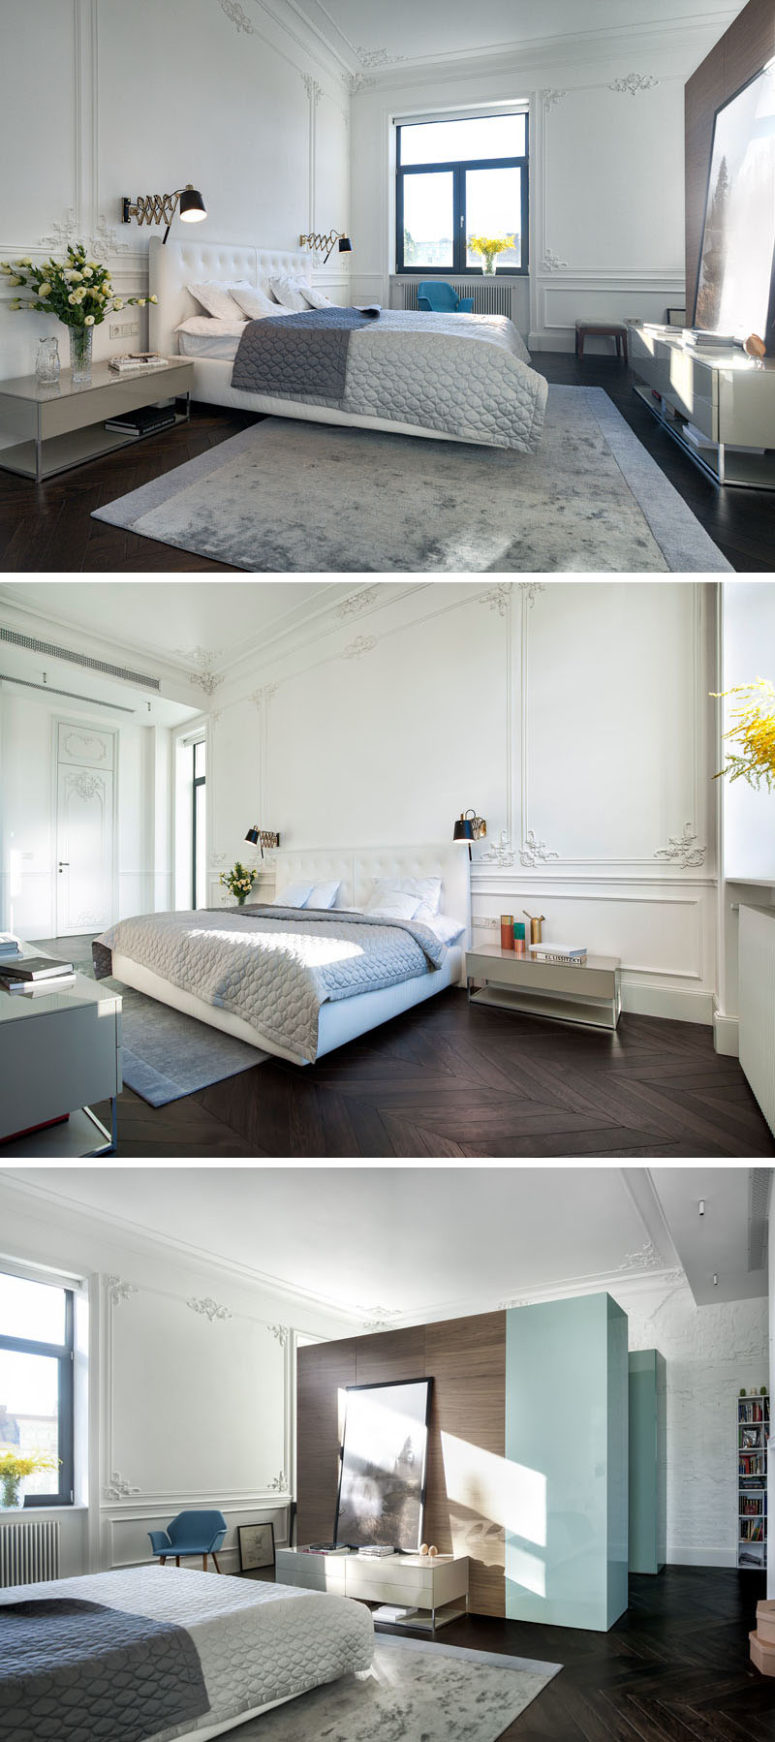 The bedroom decor is simple, neutral and cool, only the walls remind that it's a 19th century building